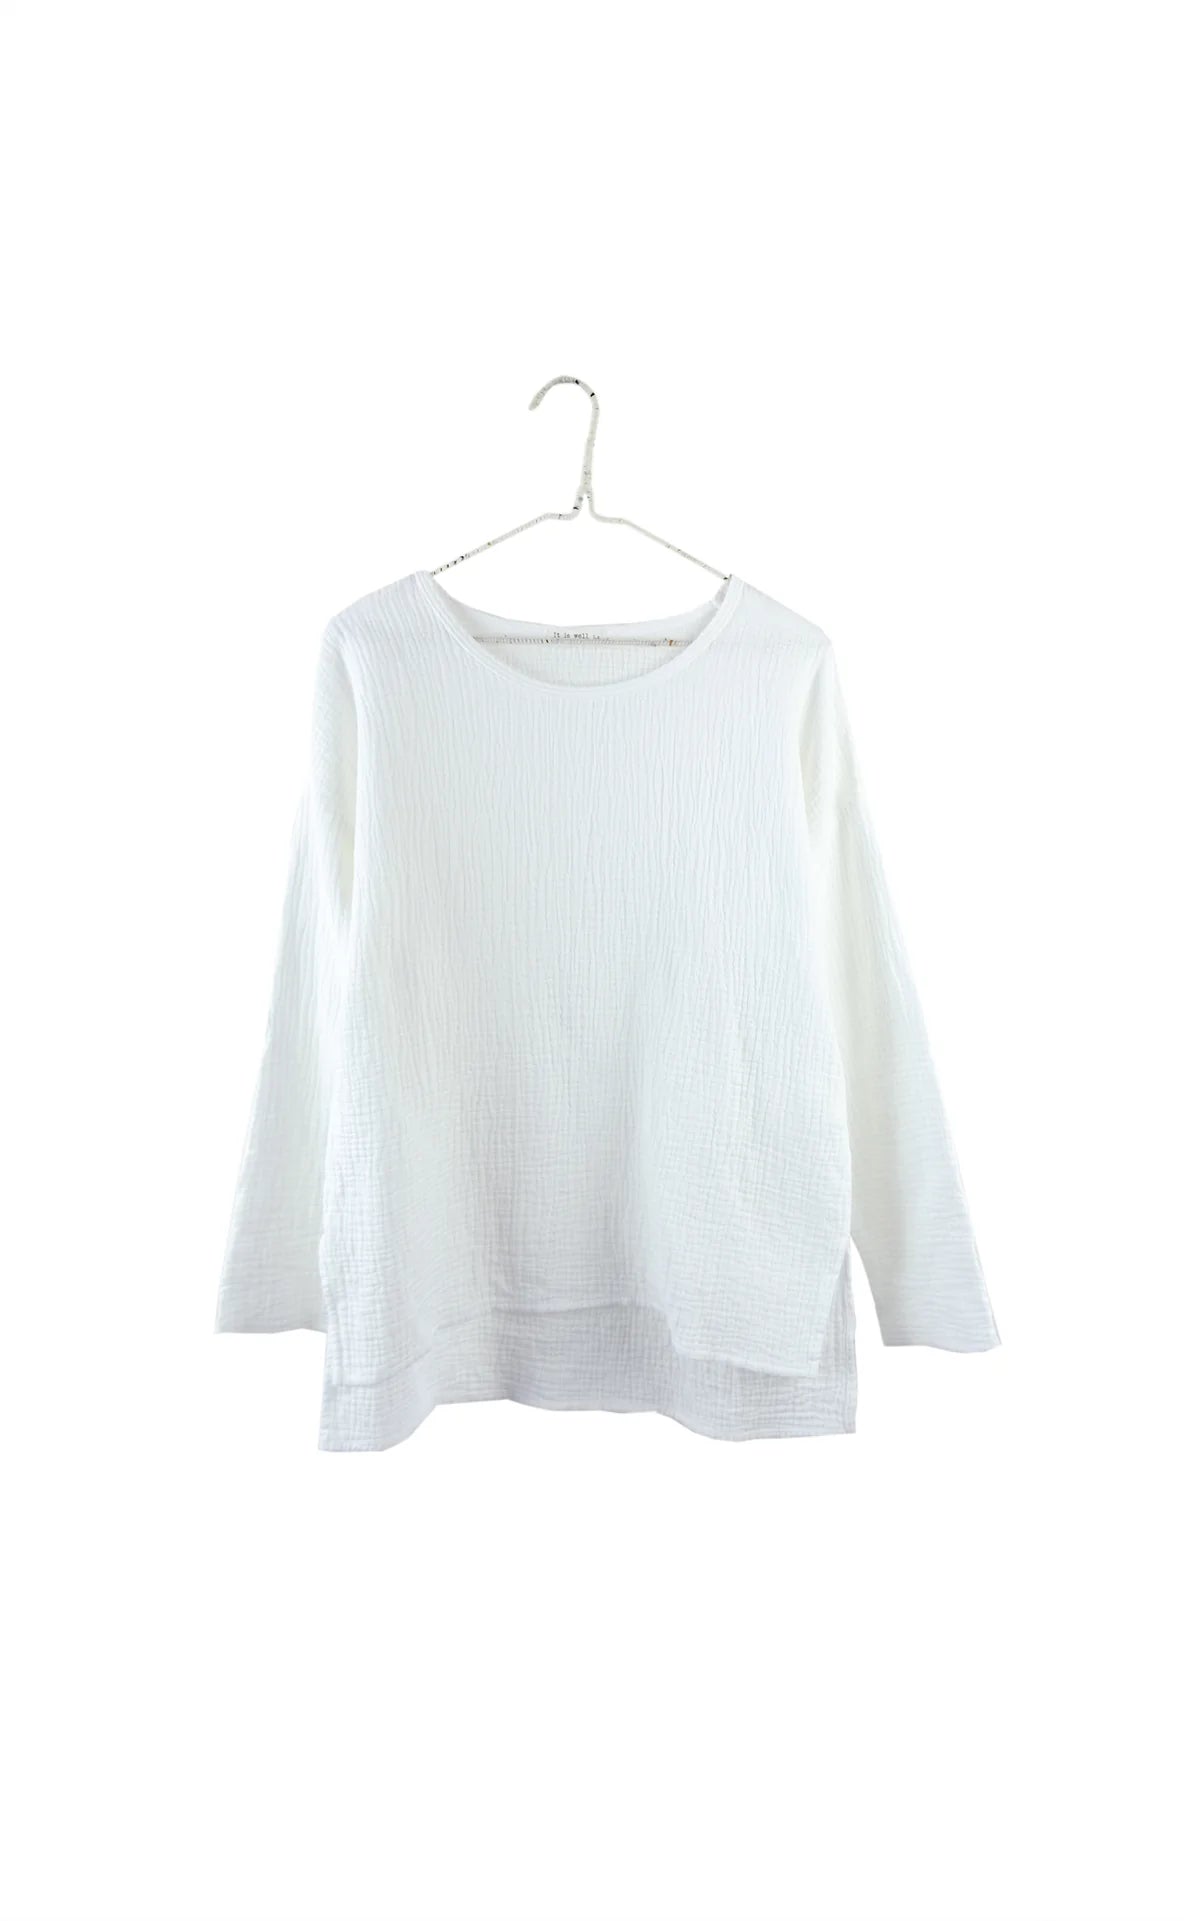 It Is Well LA - Elevated Ethical Basics Made in USA - Organic Gauze Cotton Long Sleeve Hi-Lo Top - Salt White Cotton on Hanger